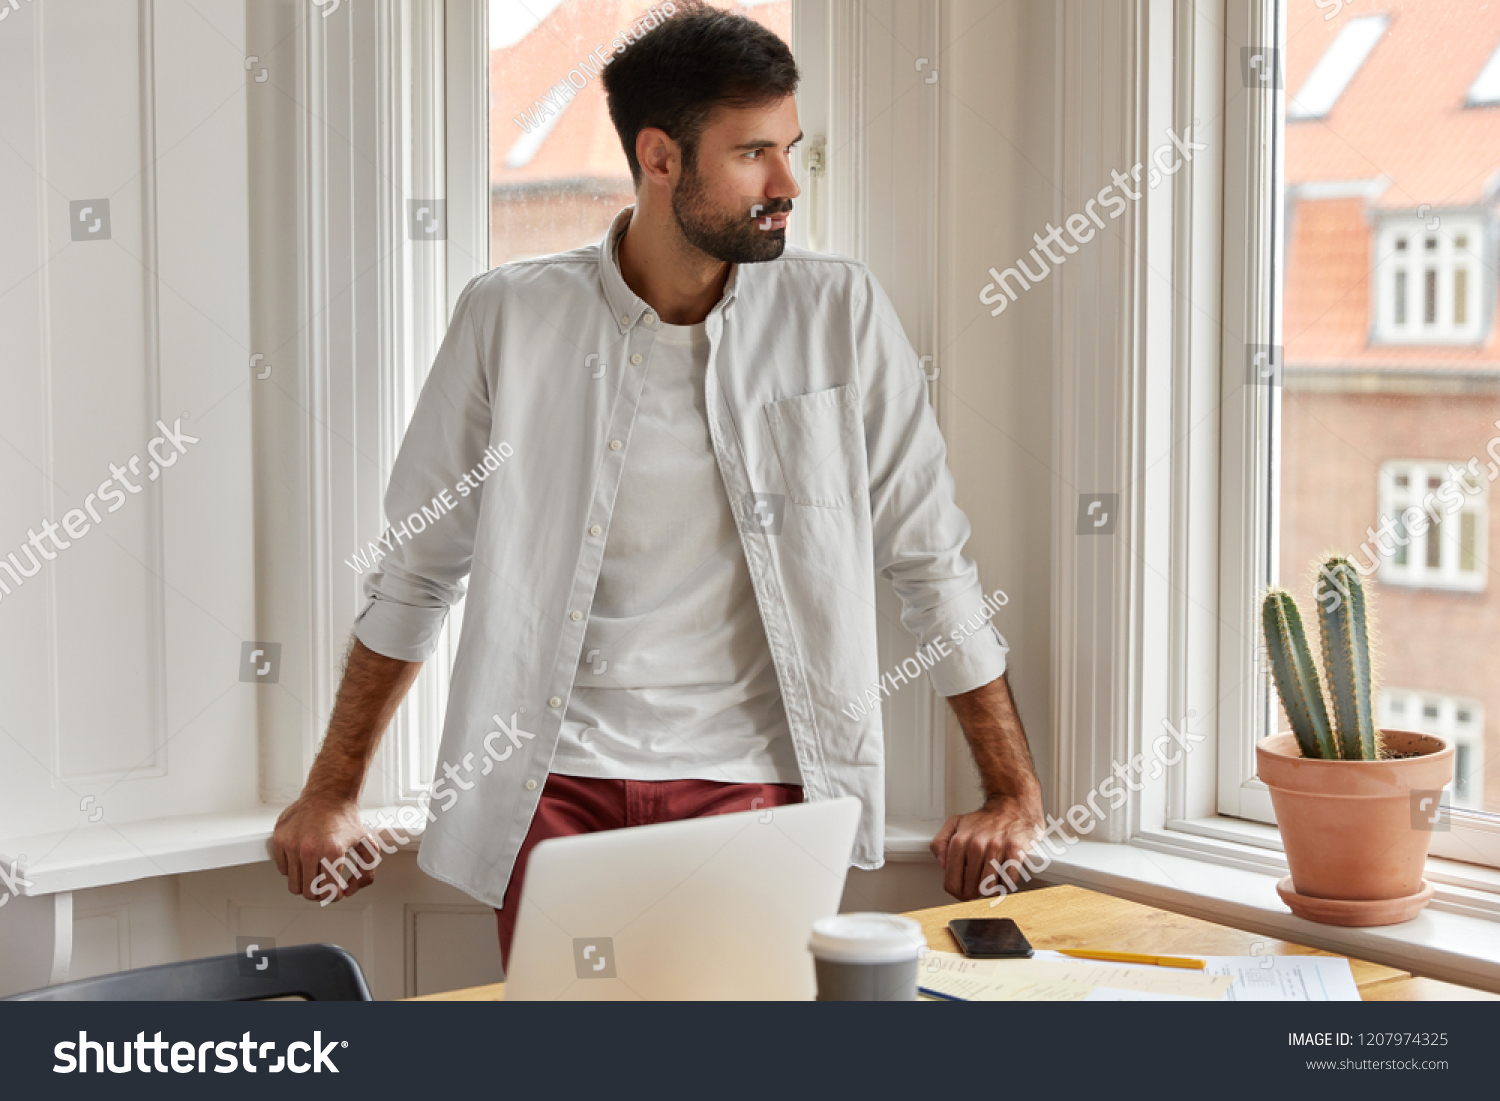 Shot of male employer works from home, stands near big window and desktop with laptop computer, watches conference video, studies documentation, has thoughtful look aside. Busy financier indoor #1207974325